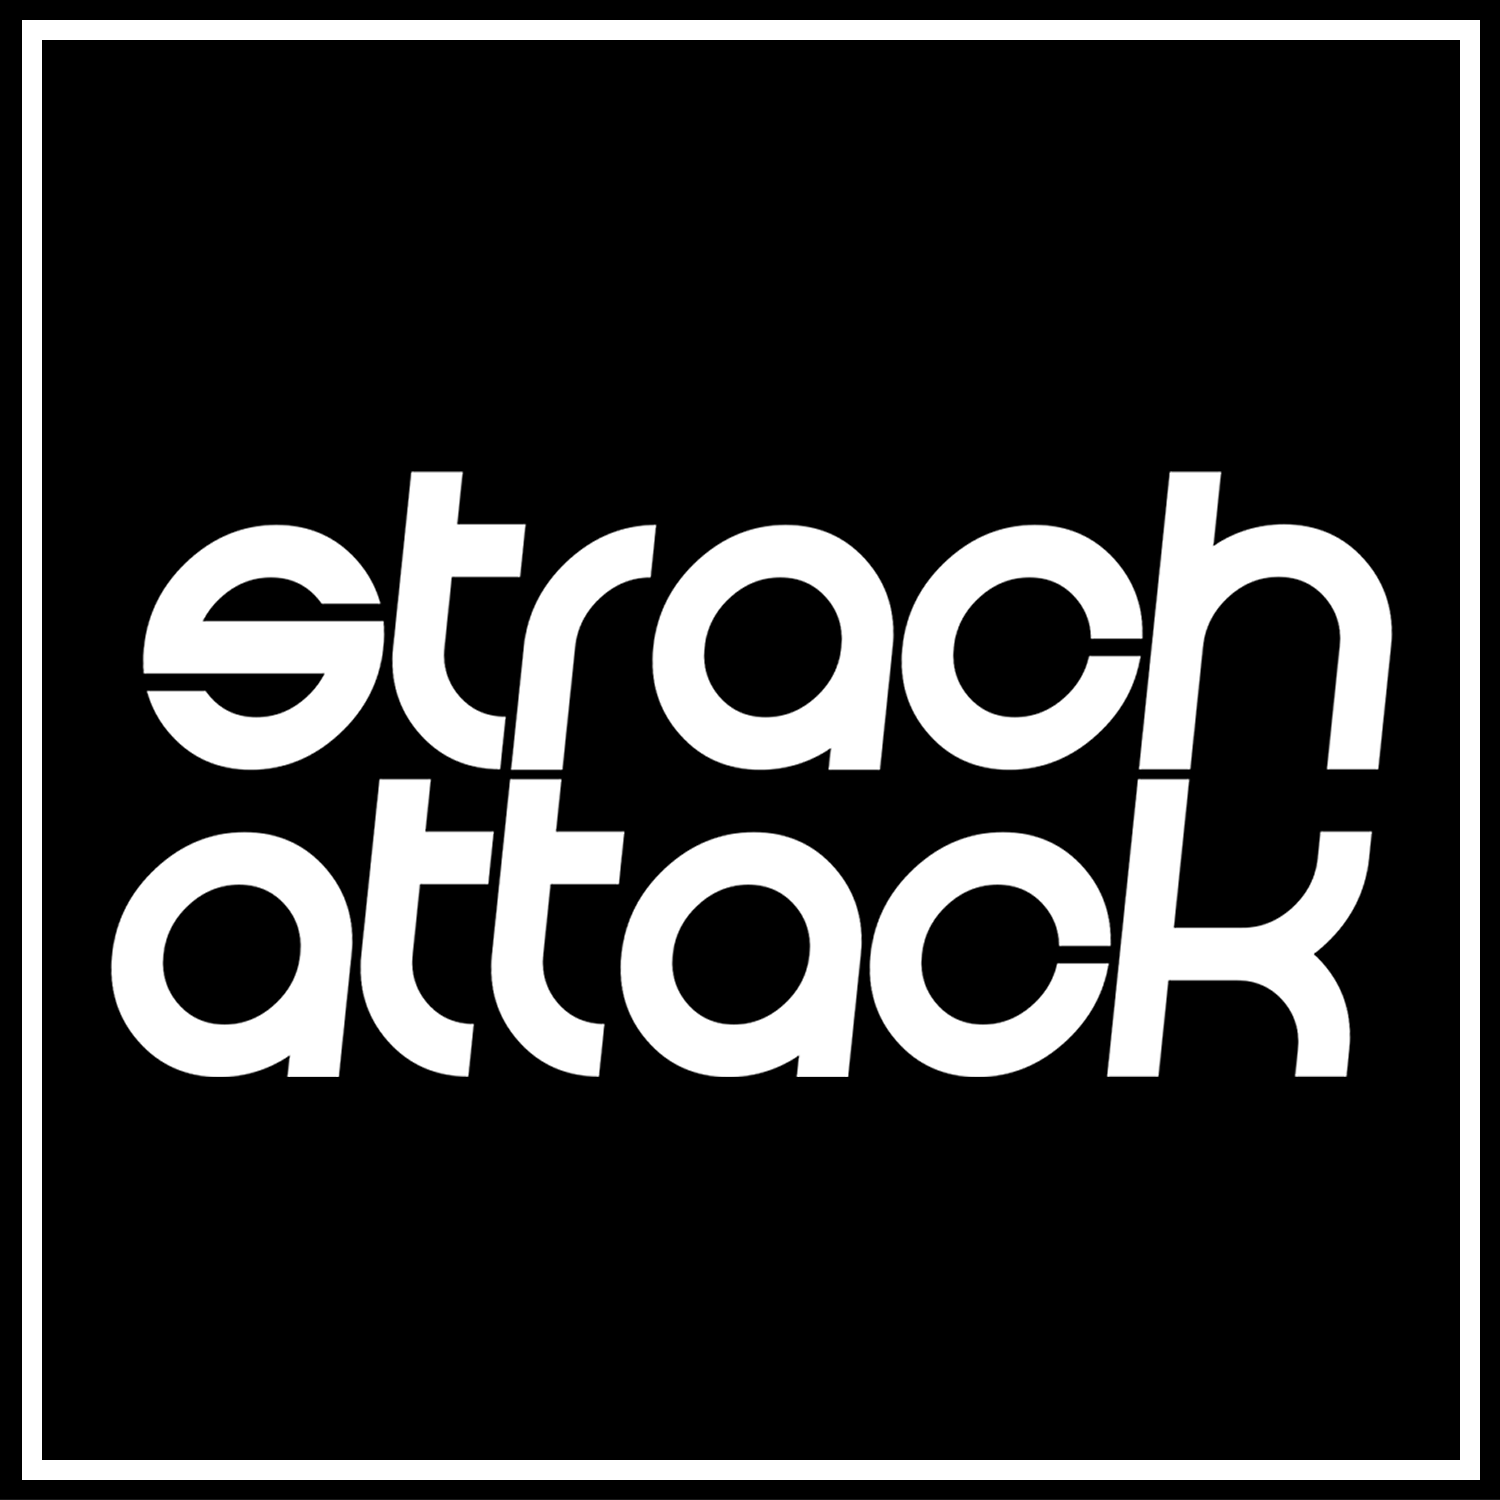 STRACHATTACK HAS A SET TO PLAY AT BABSCON!